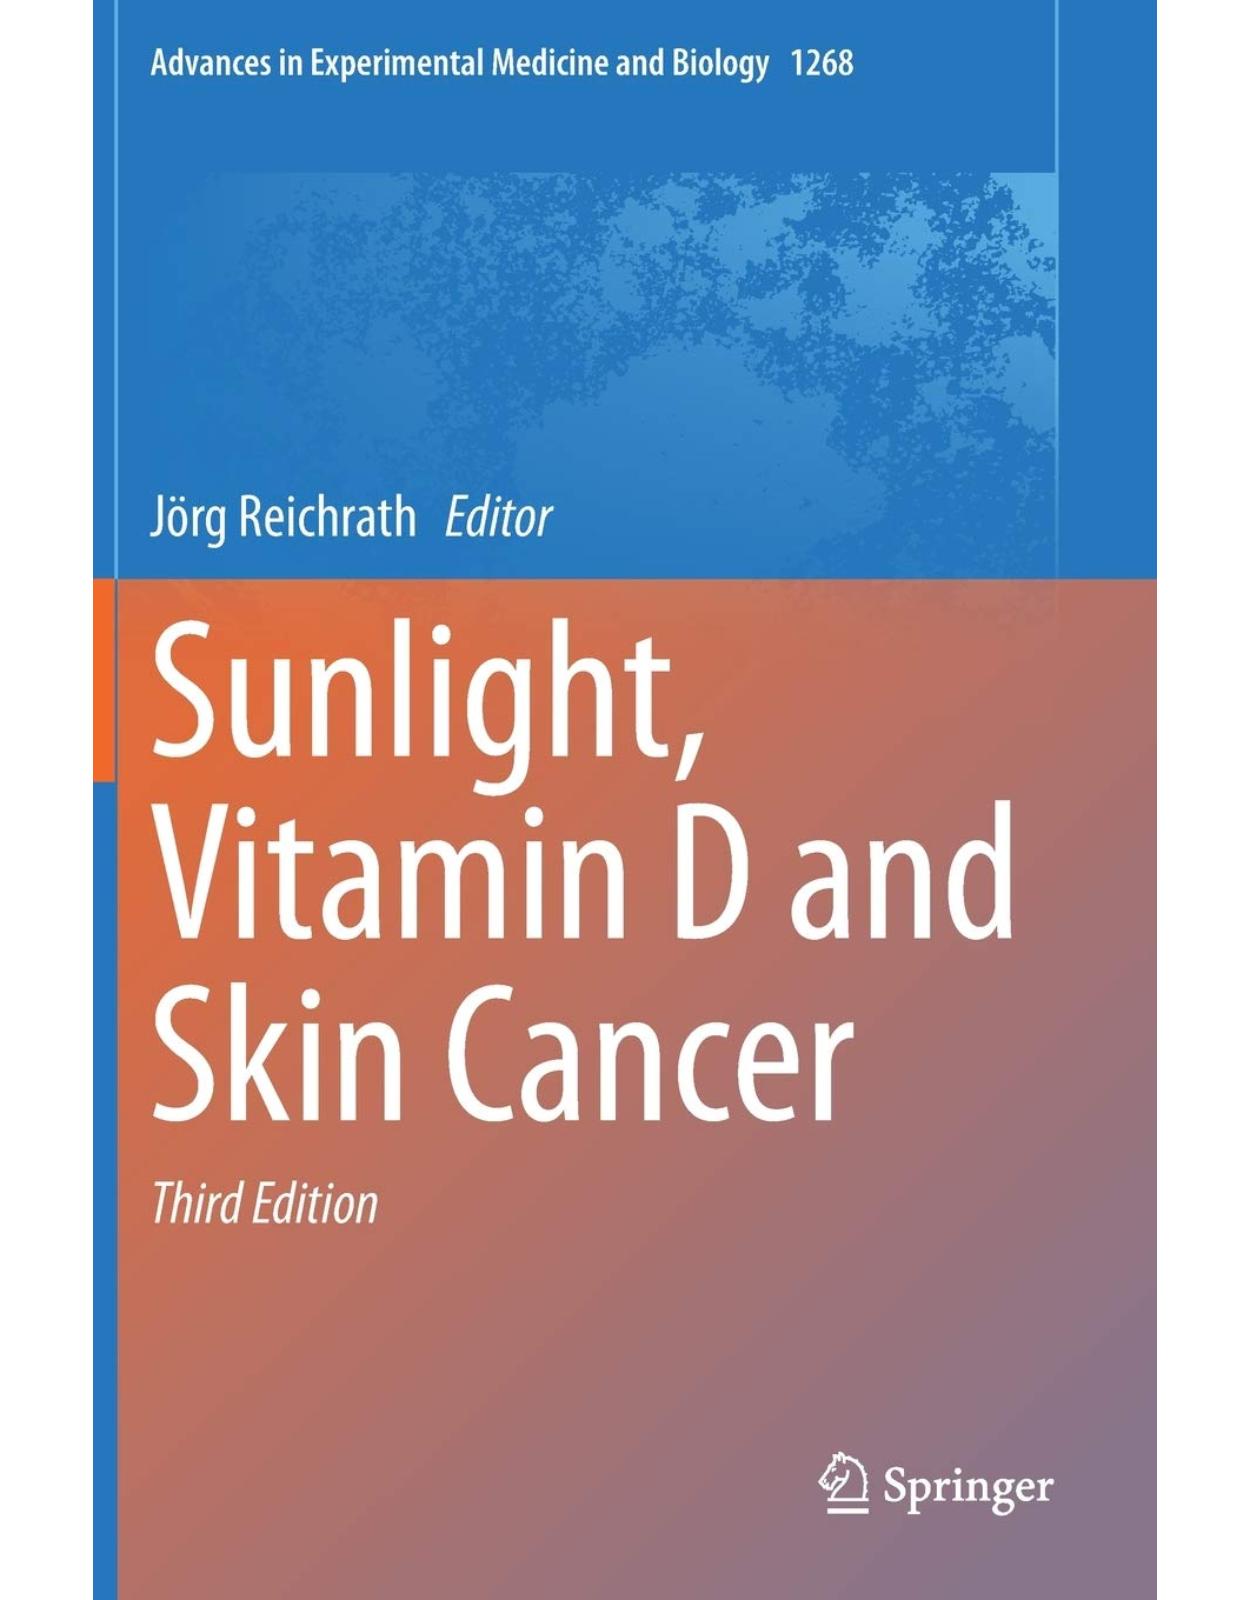 Sunlight, Vitamin D and Skin Cancer